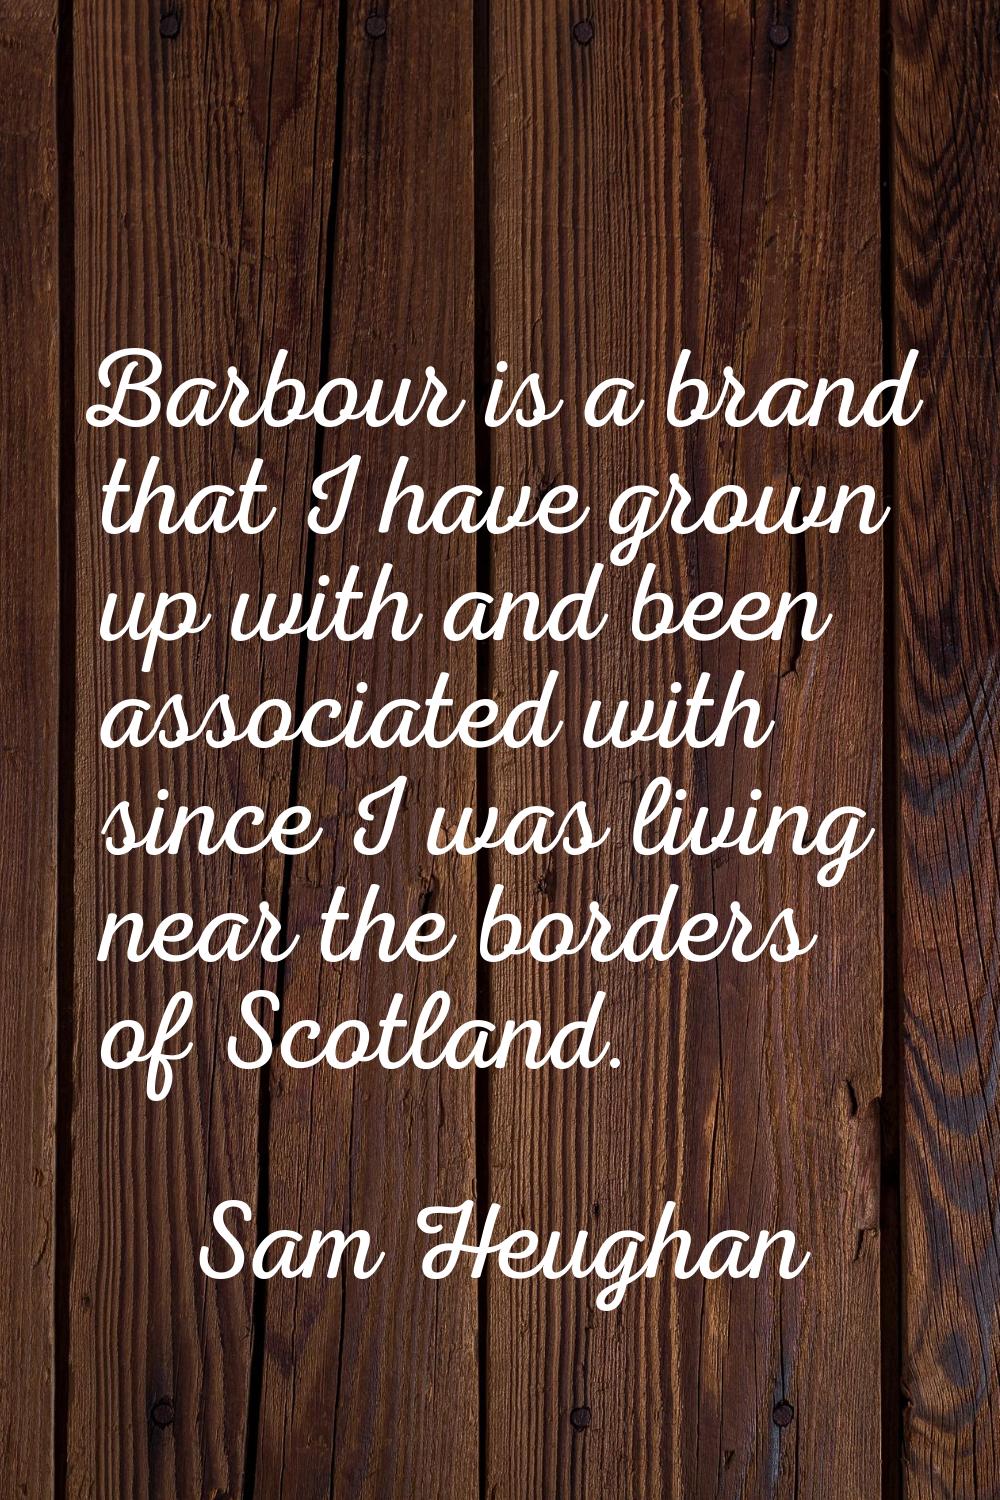 Barbour is a brand that I have grown up with and been associated with since I was living near the b